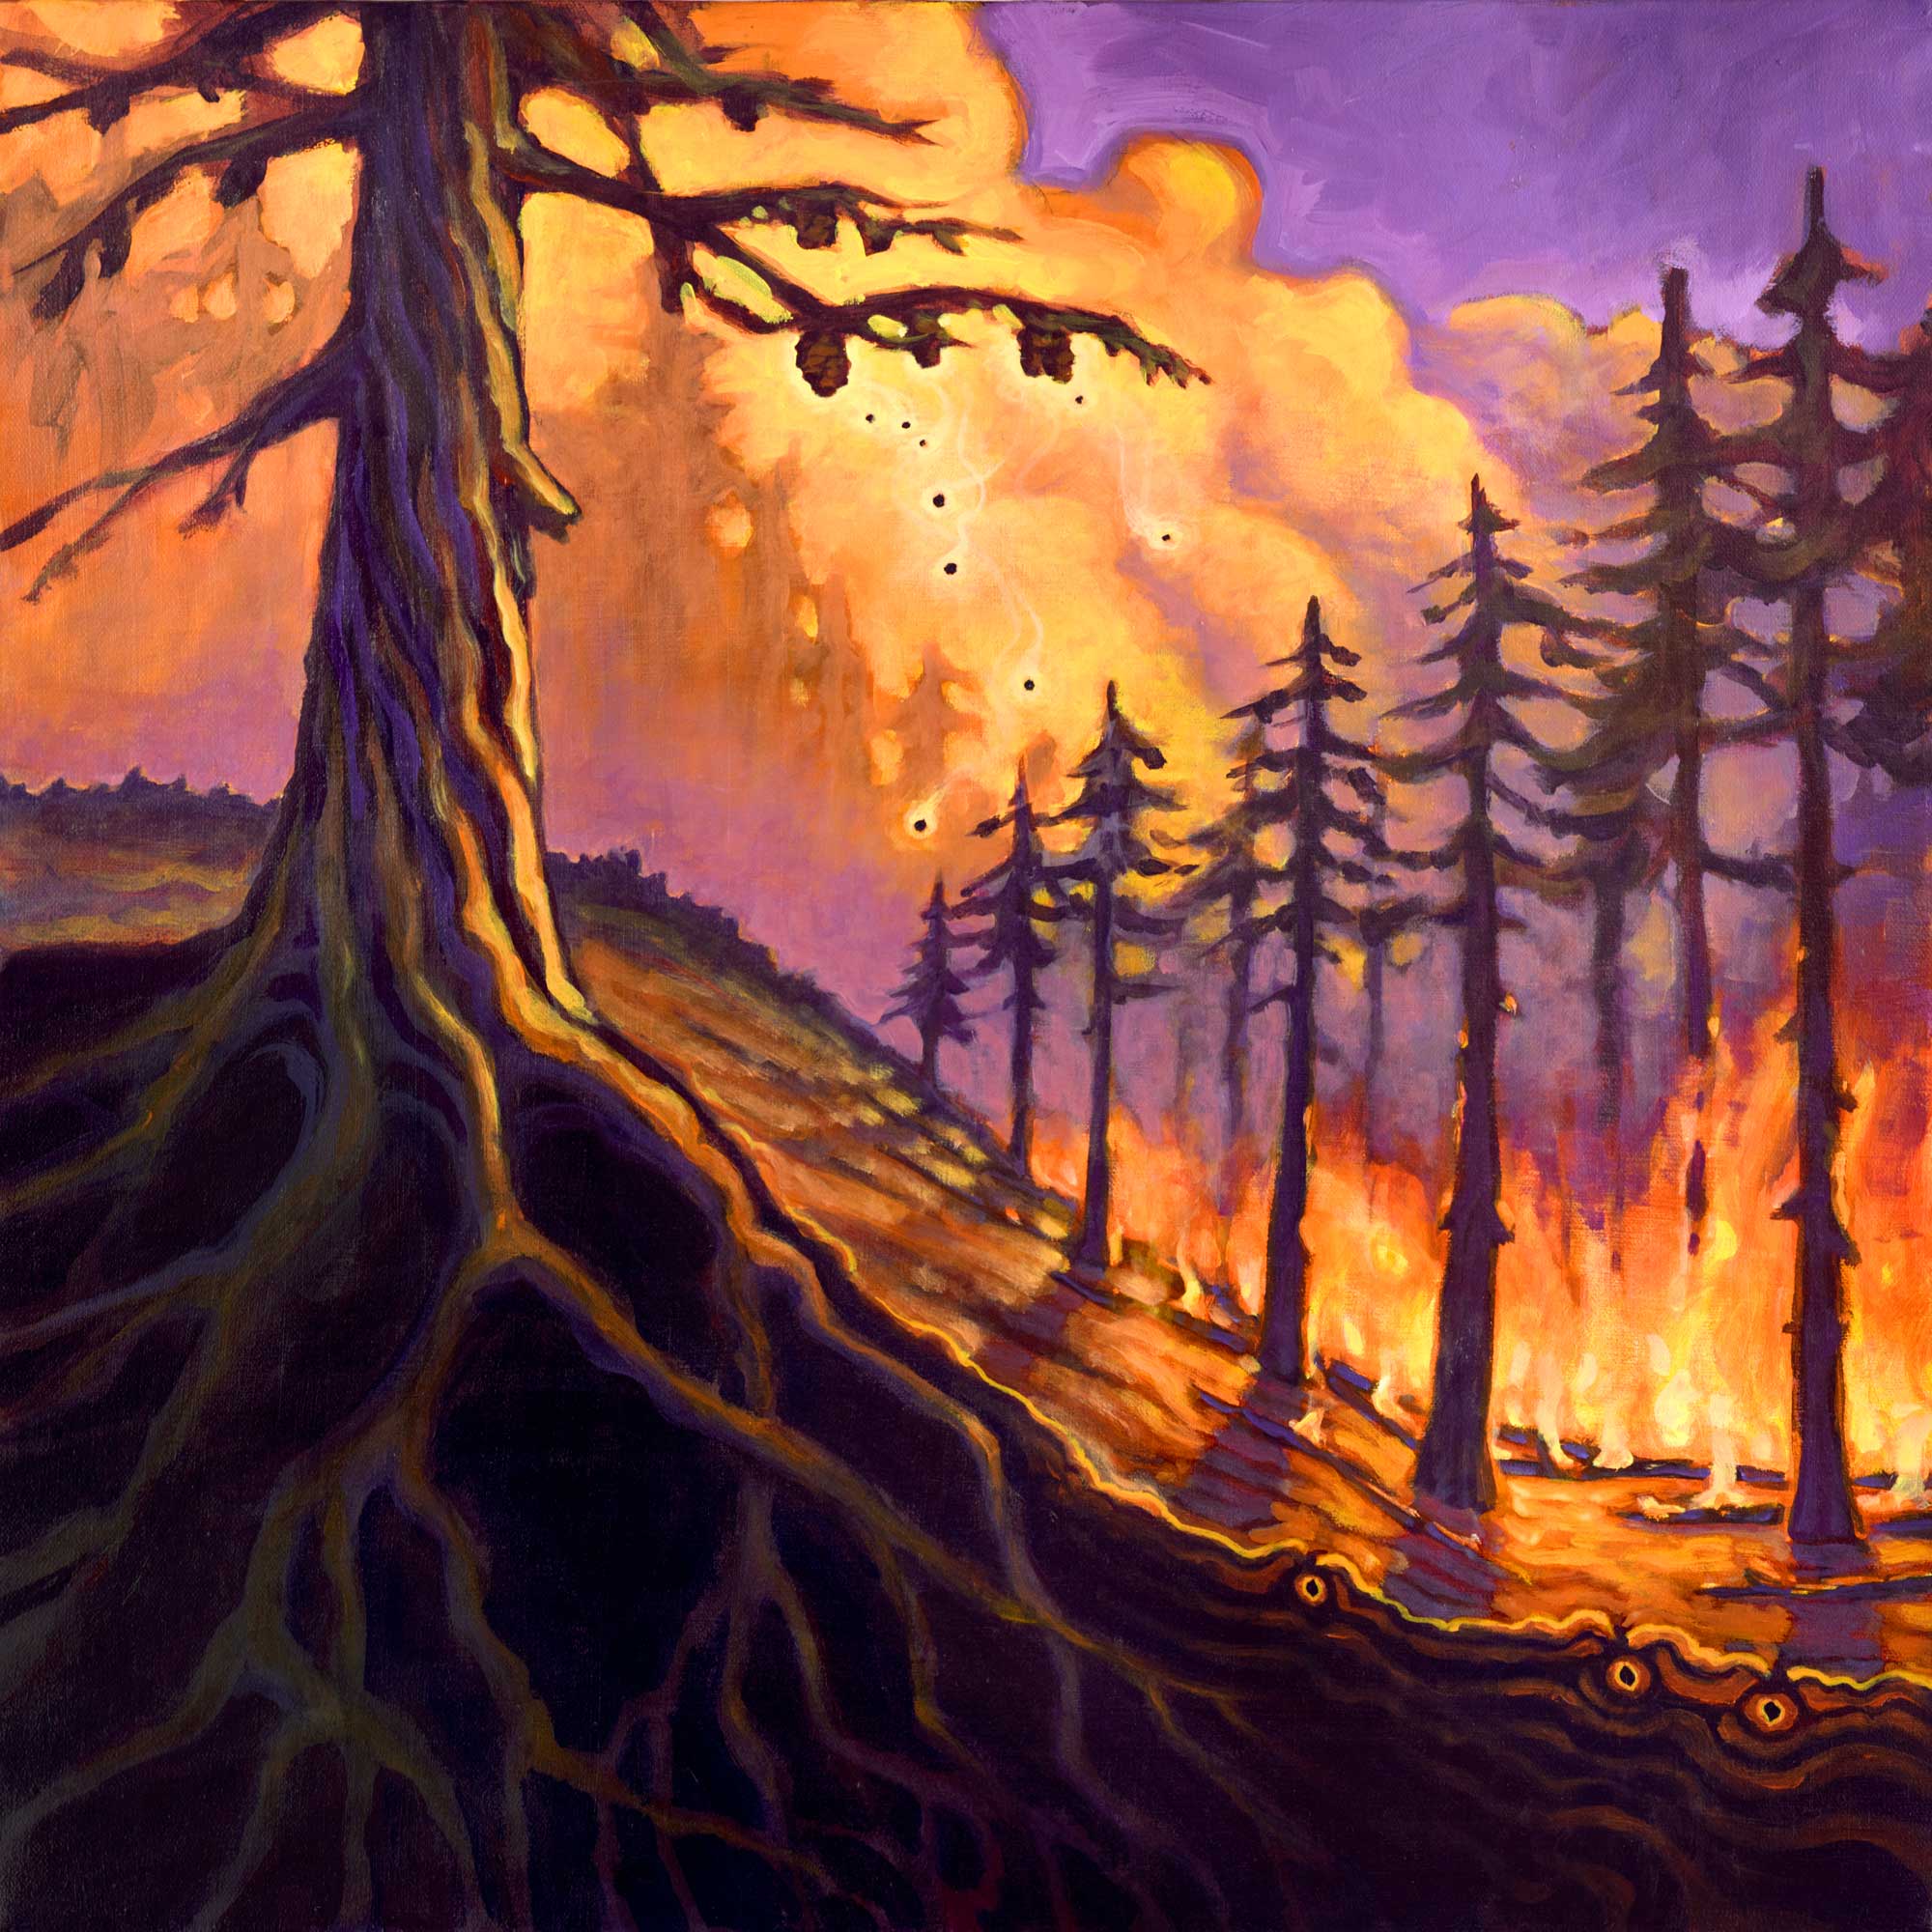 Painting of a wildfire burning a forest and causing a tree to release it's seeds